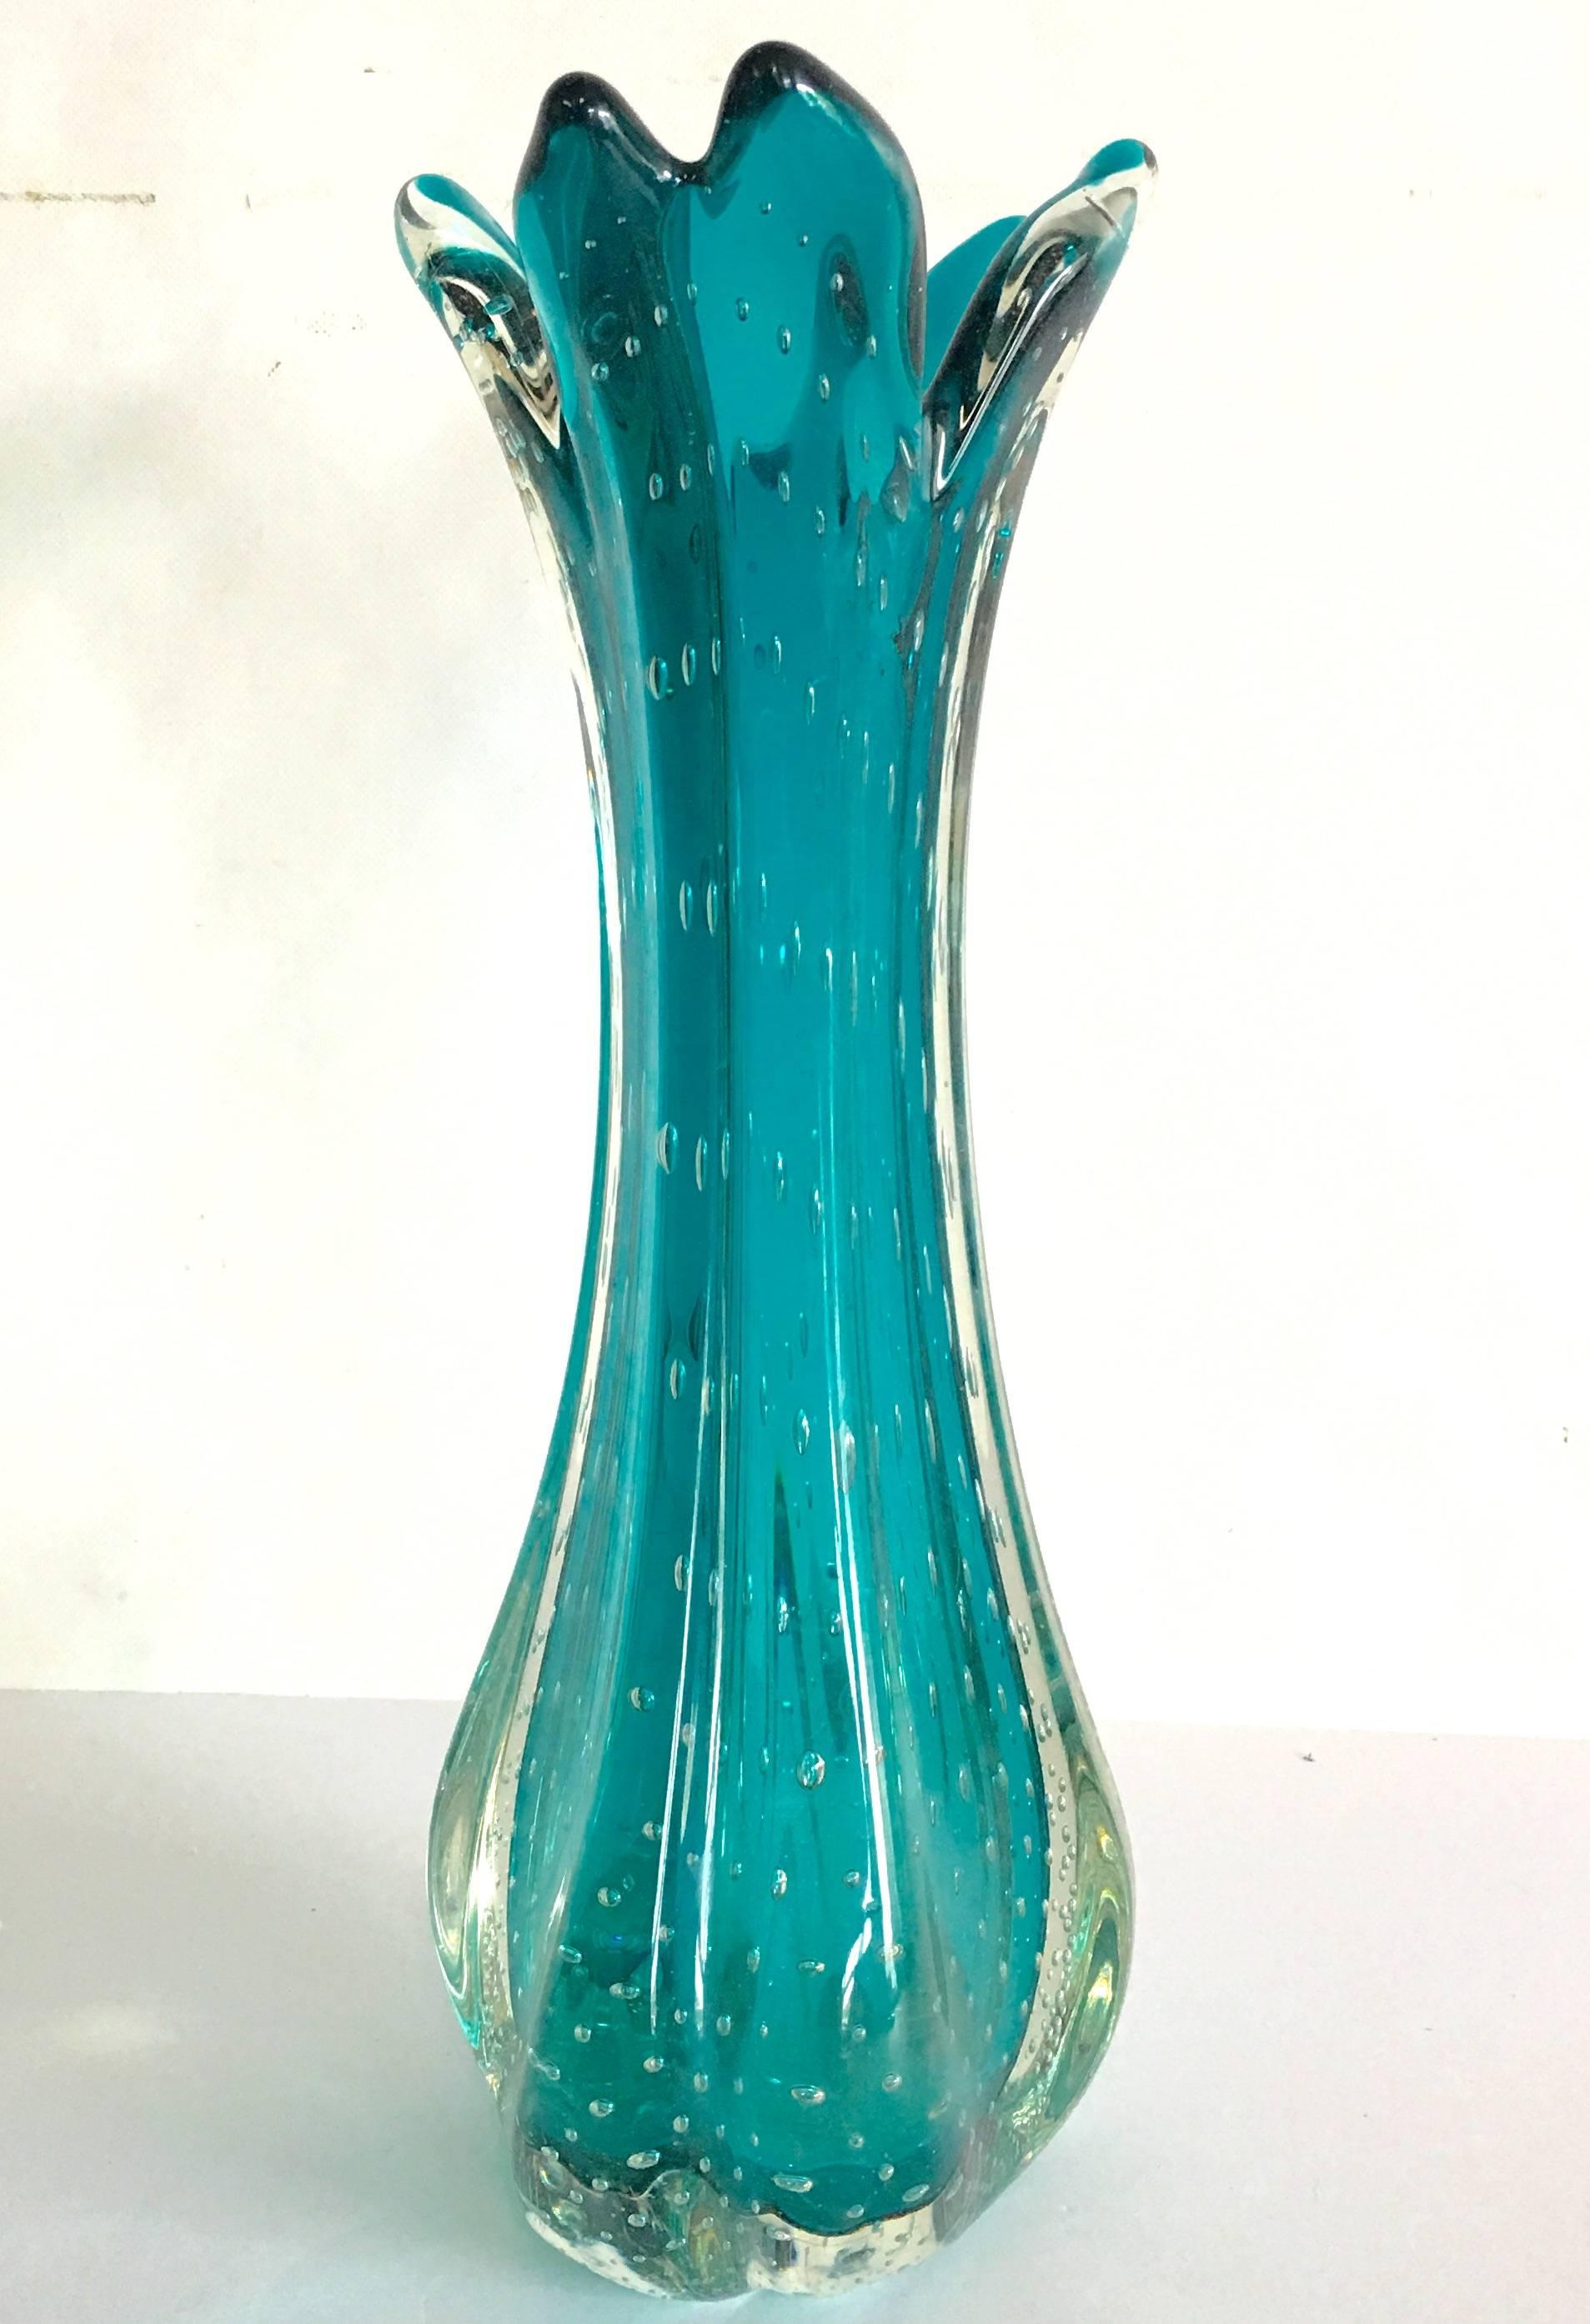 Bright teal blue 1950's inches tall encased bubbles (bullicante) Italian Murano glass vase in the style of Barovier & Toso. No makers mark present.